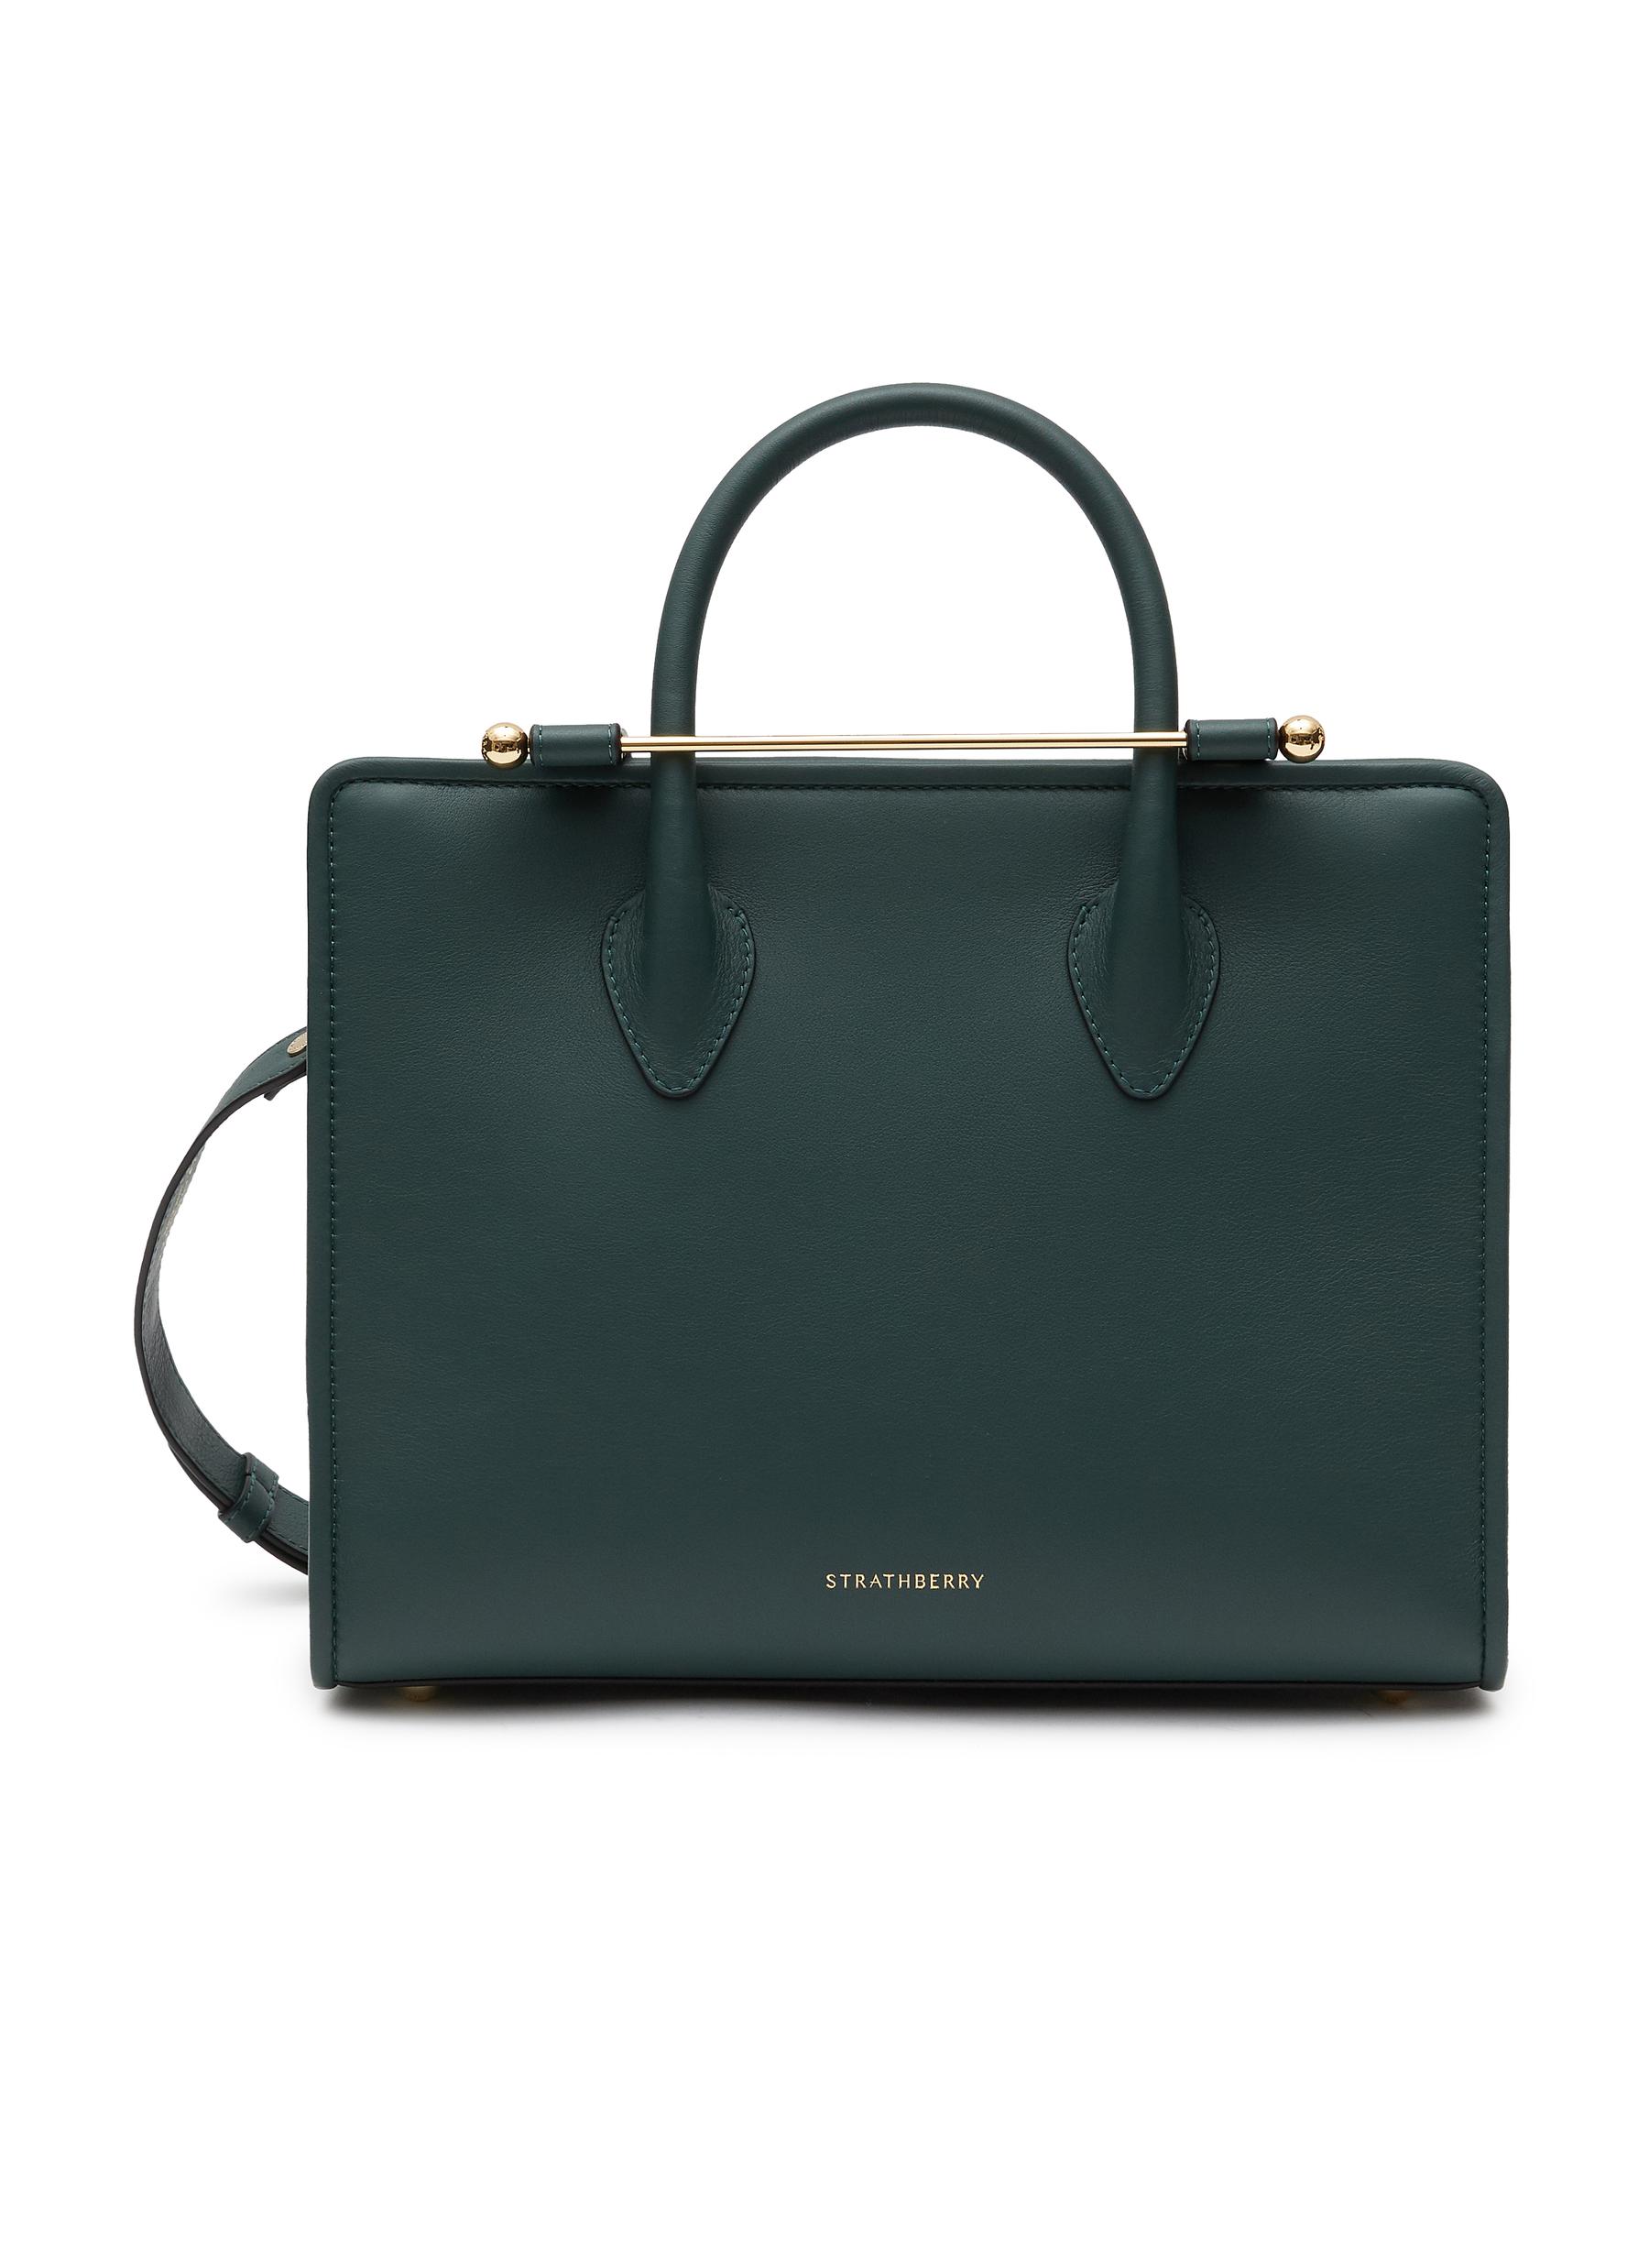 Strathberry 'the ' Medium Leather Tote Bag In Green